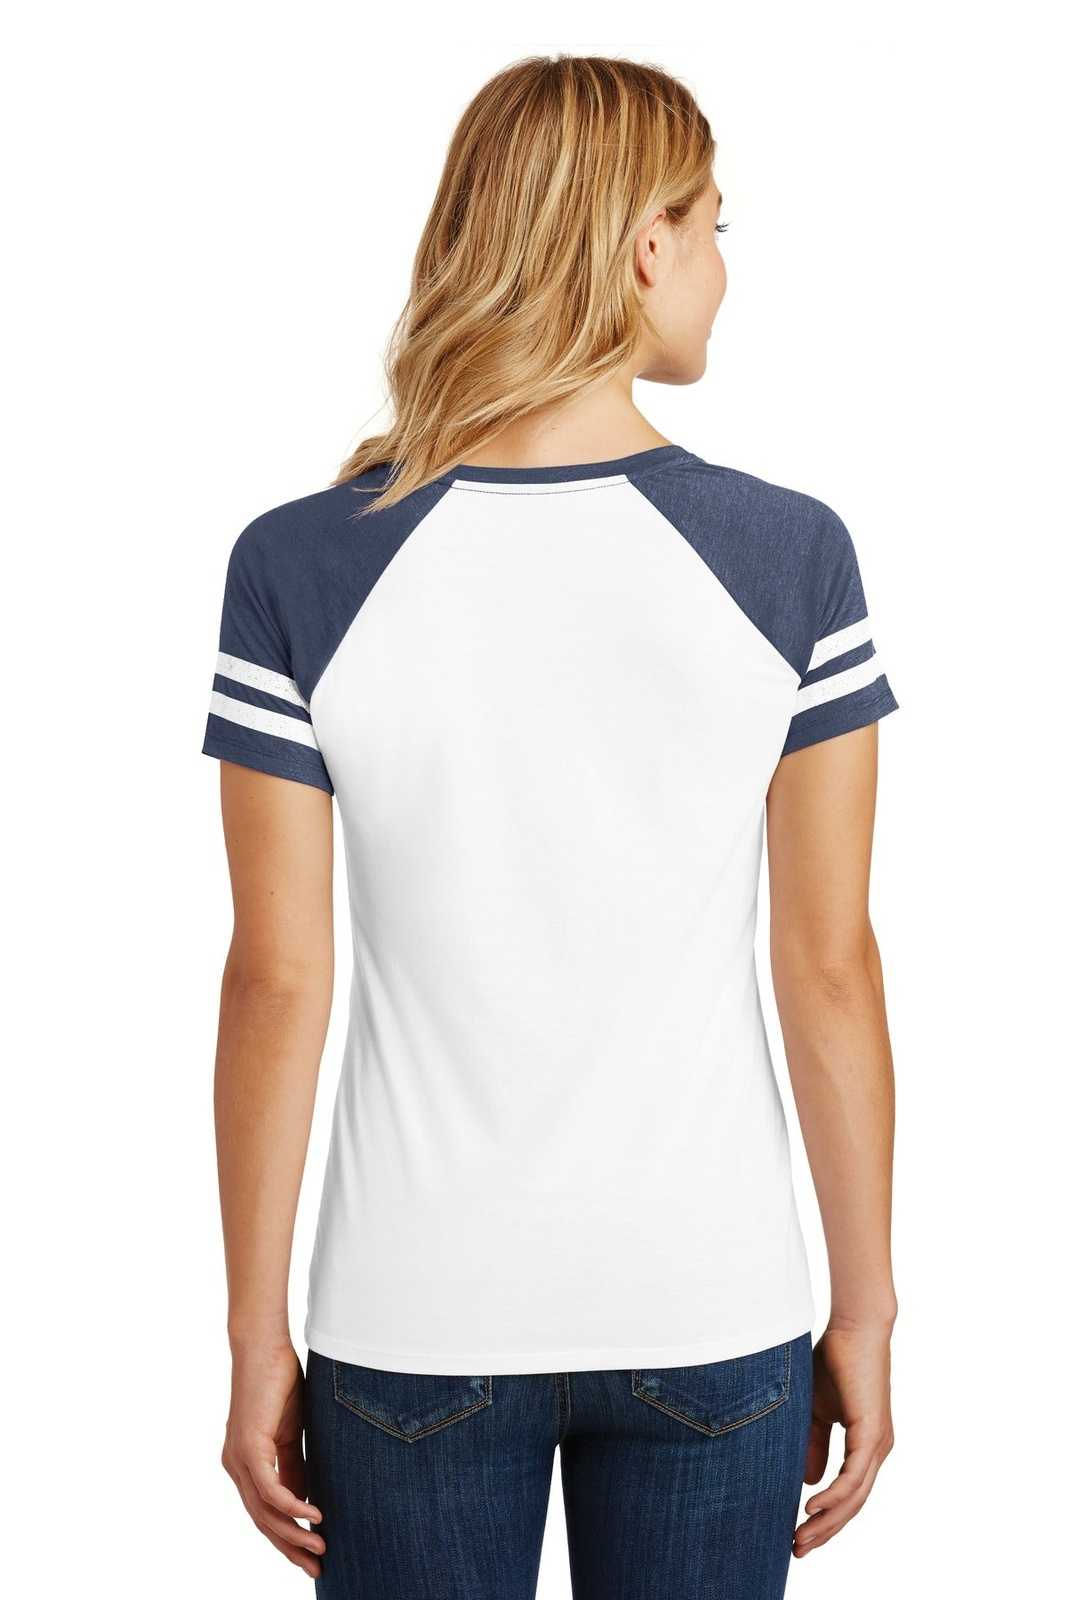 District DM476 Women's Game V-Neck Tee - White Heathered True Navy - HIT a Double - 1